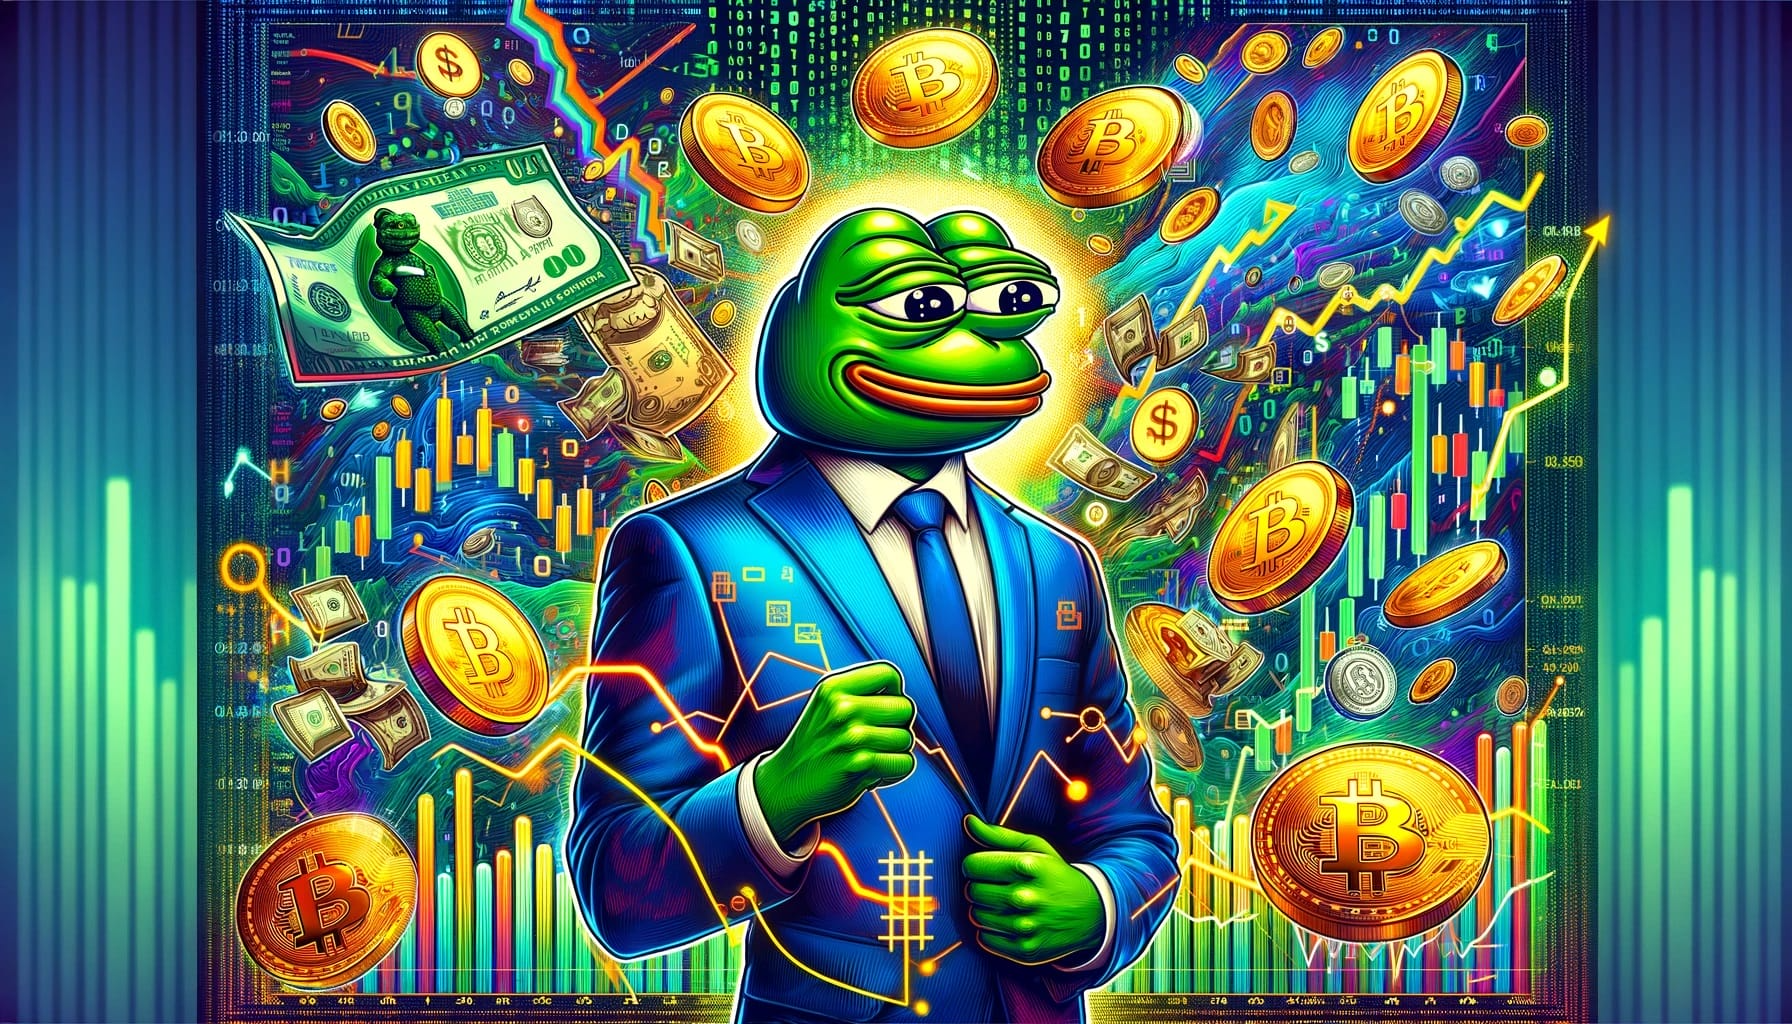 Pepe Price Prediction: PEPE Pumps 17% As This Dogecoin Upgrade Soars Past $3.7M